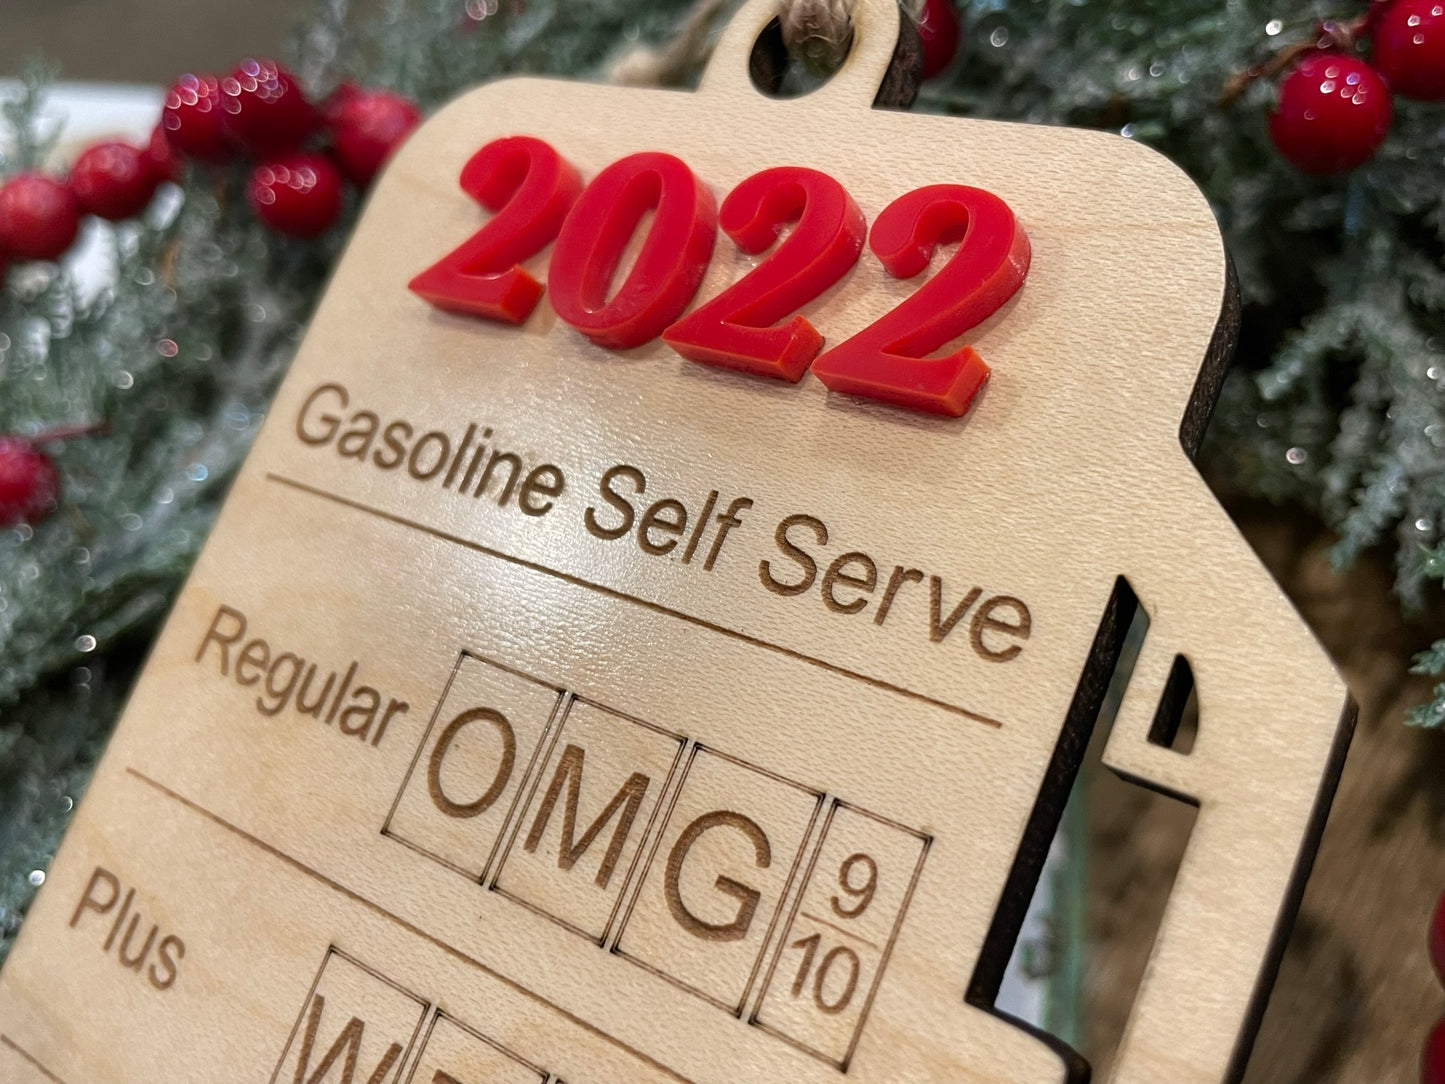 2022 Gas Prices Christmas Ornament